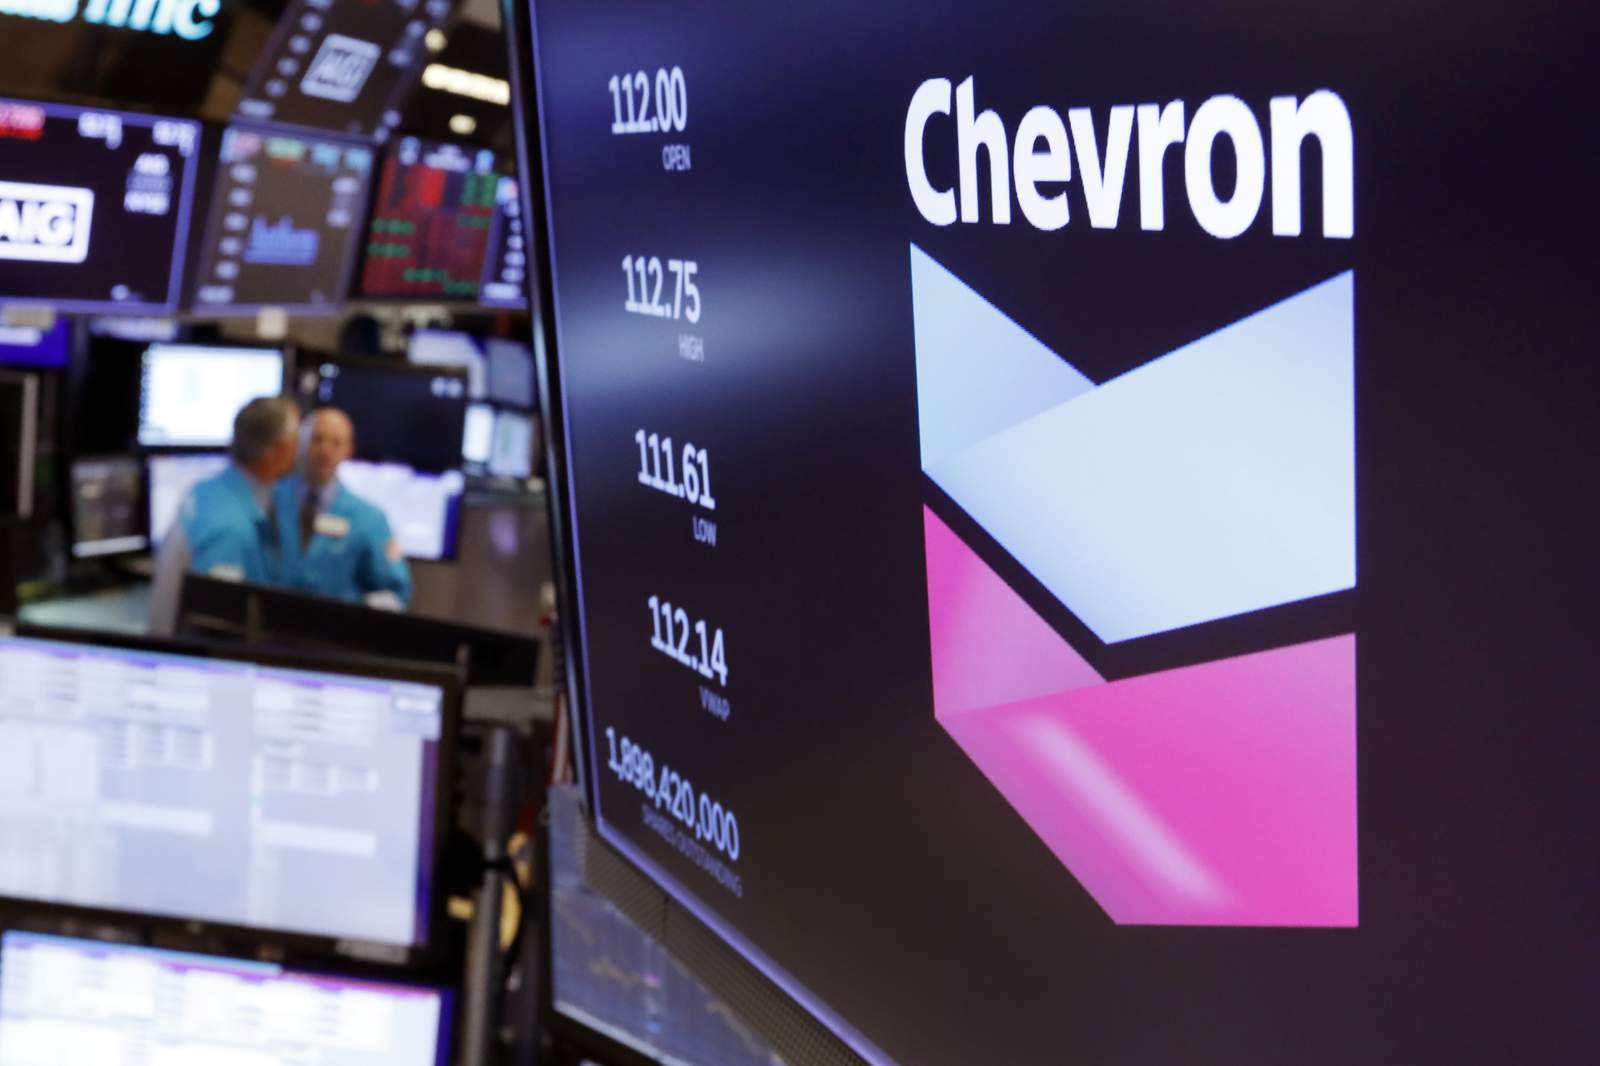 Chevron acquires Noble for $5 billion in all-stock deal